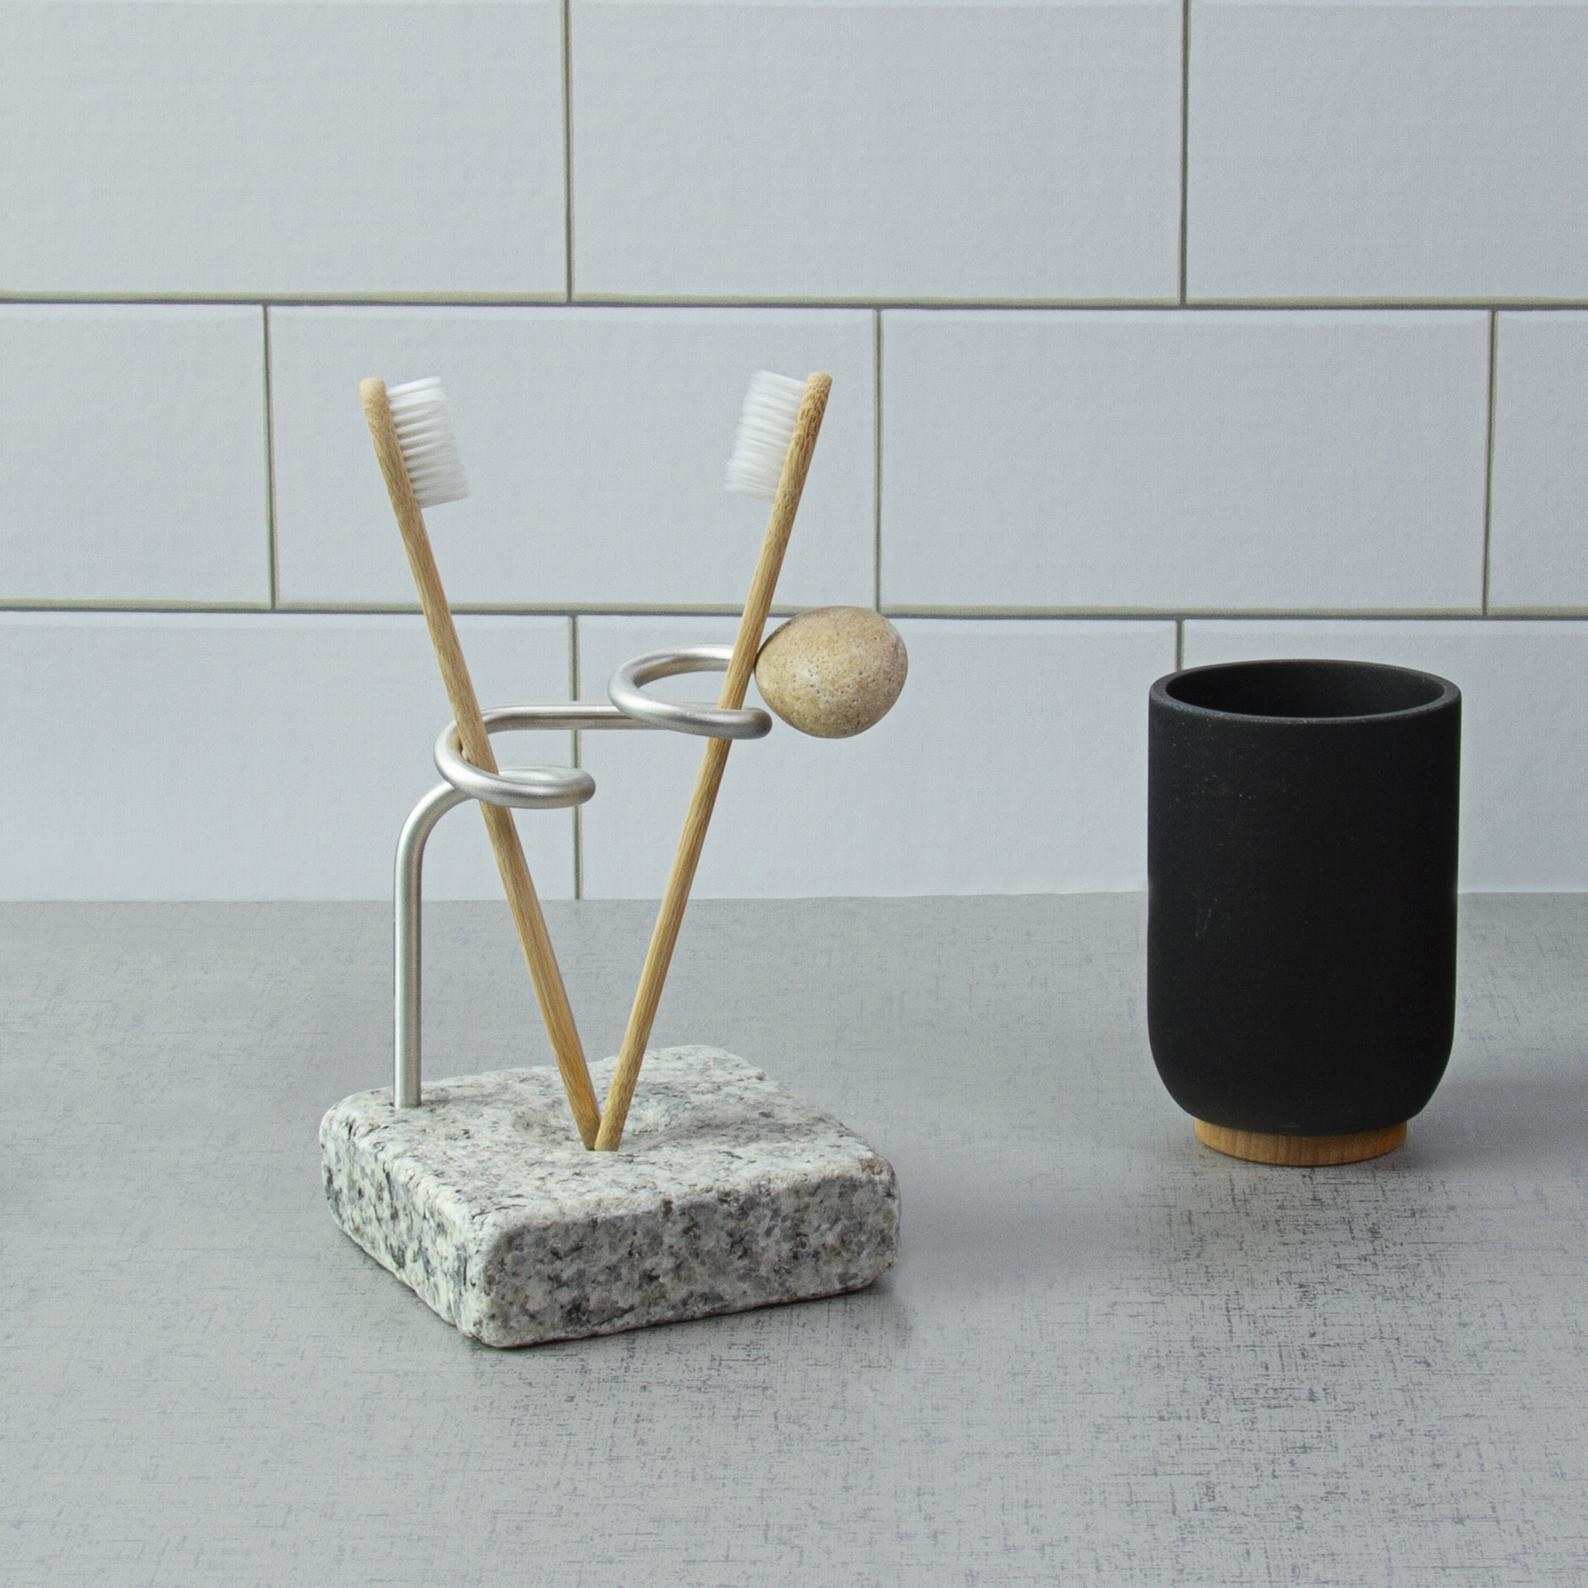 toothbrush holder with marble-like stone base and a swirly silver rod that twists to hold two toothbrushes